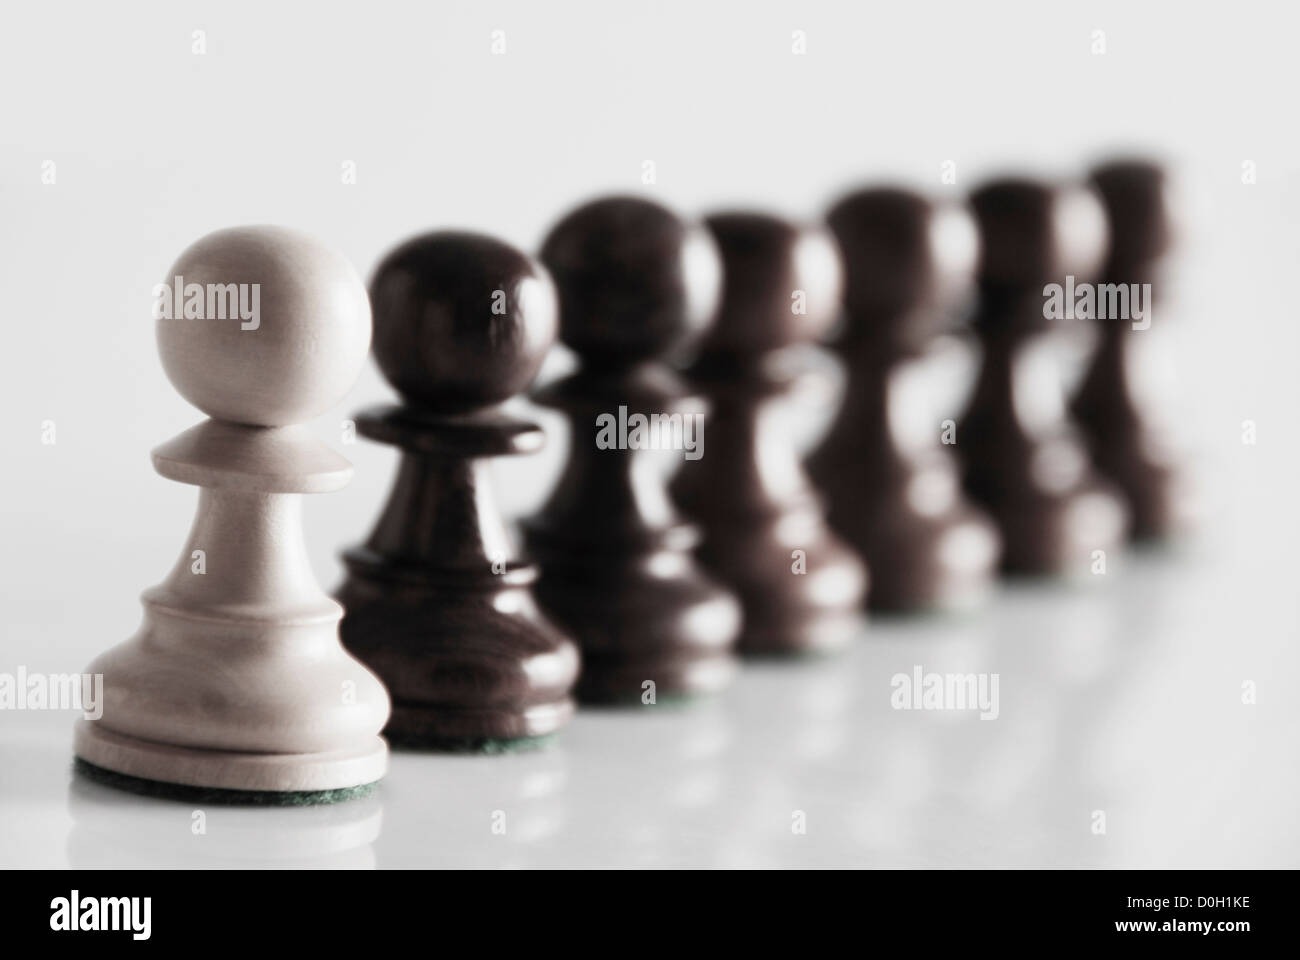 Chess pawns in a row Stock Photo